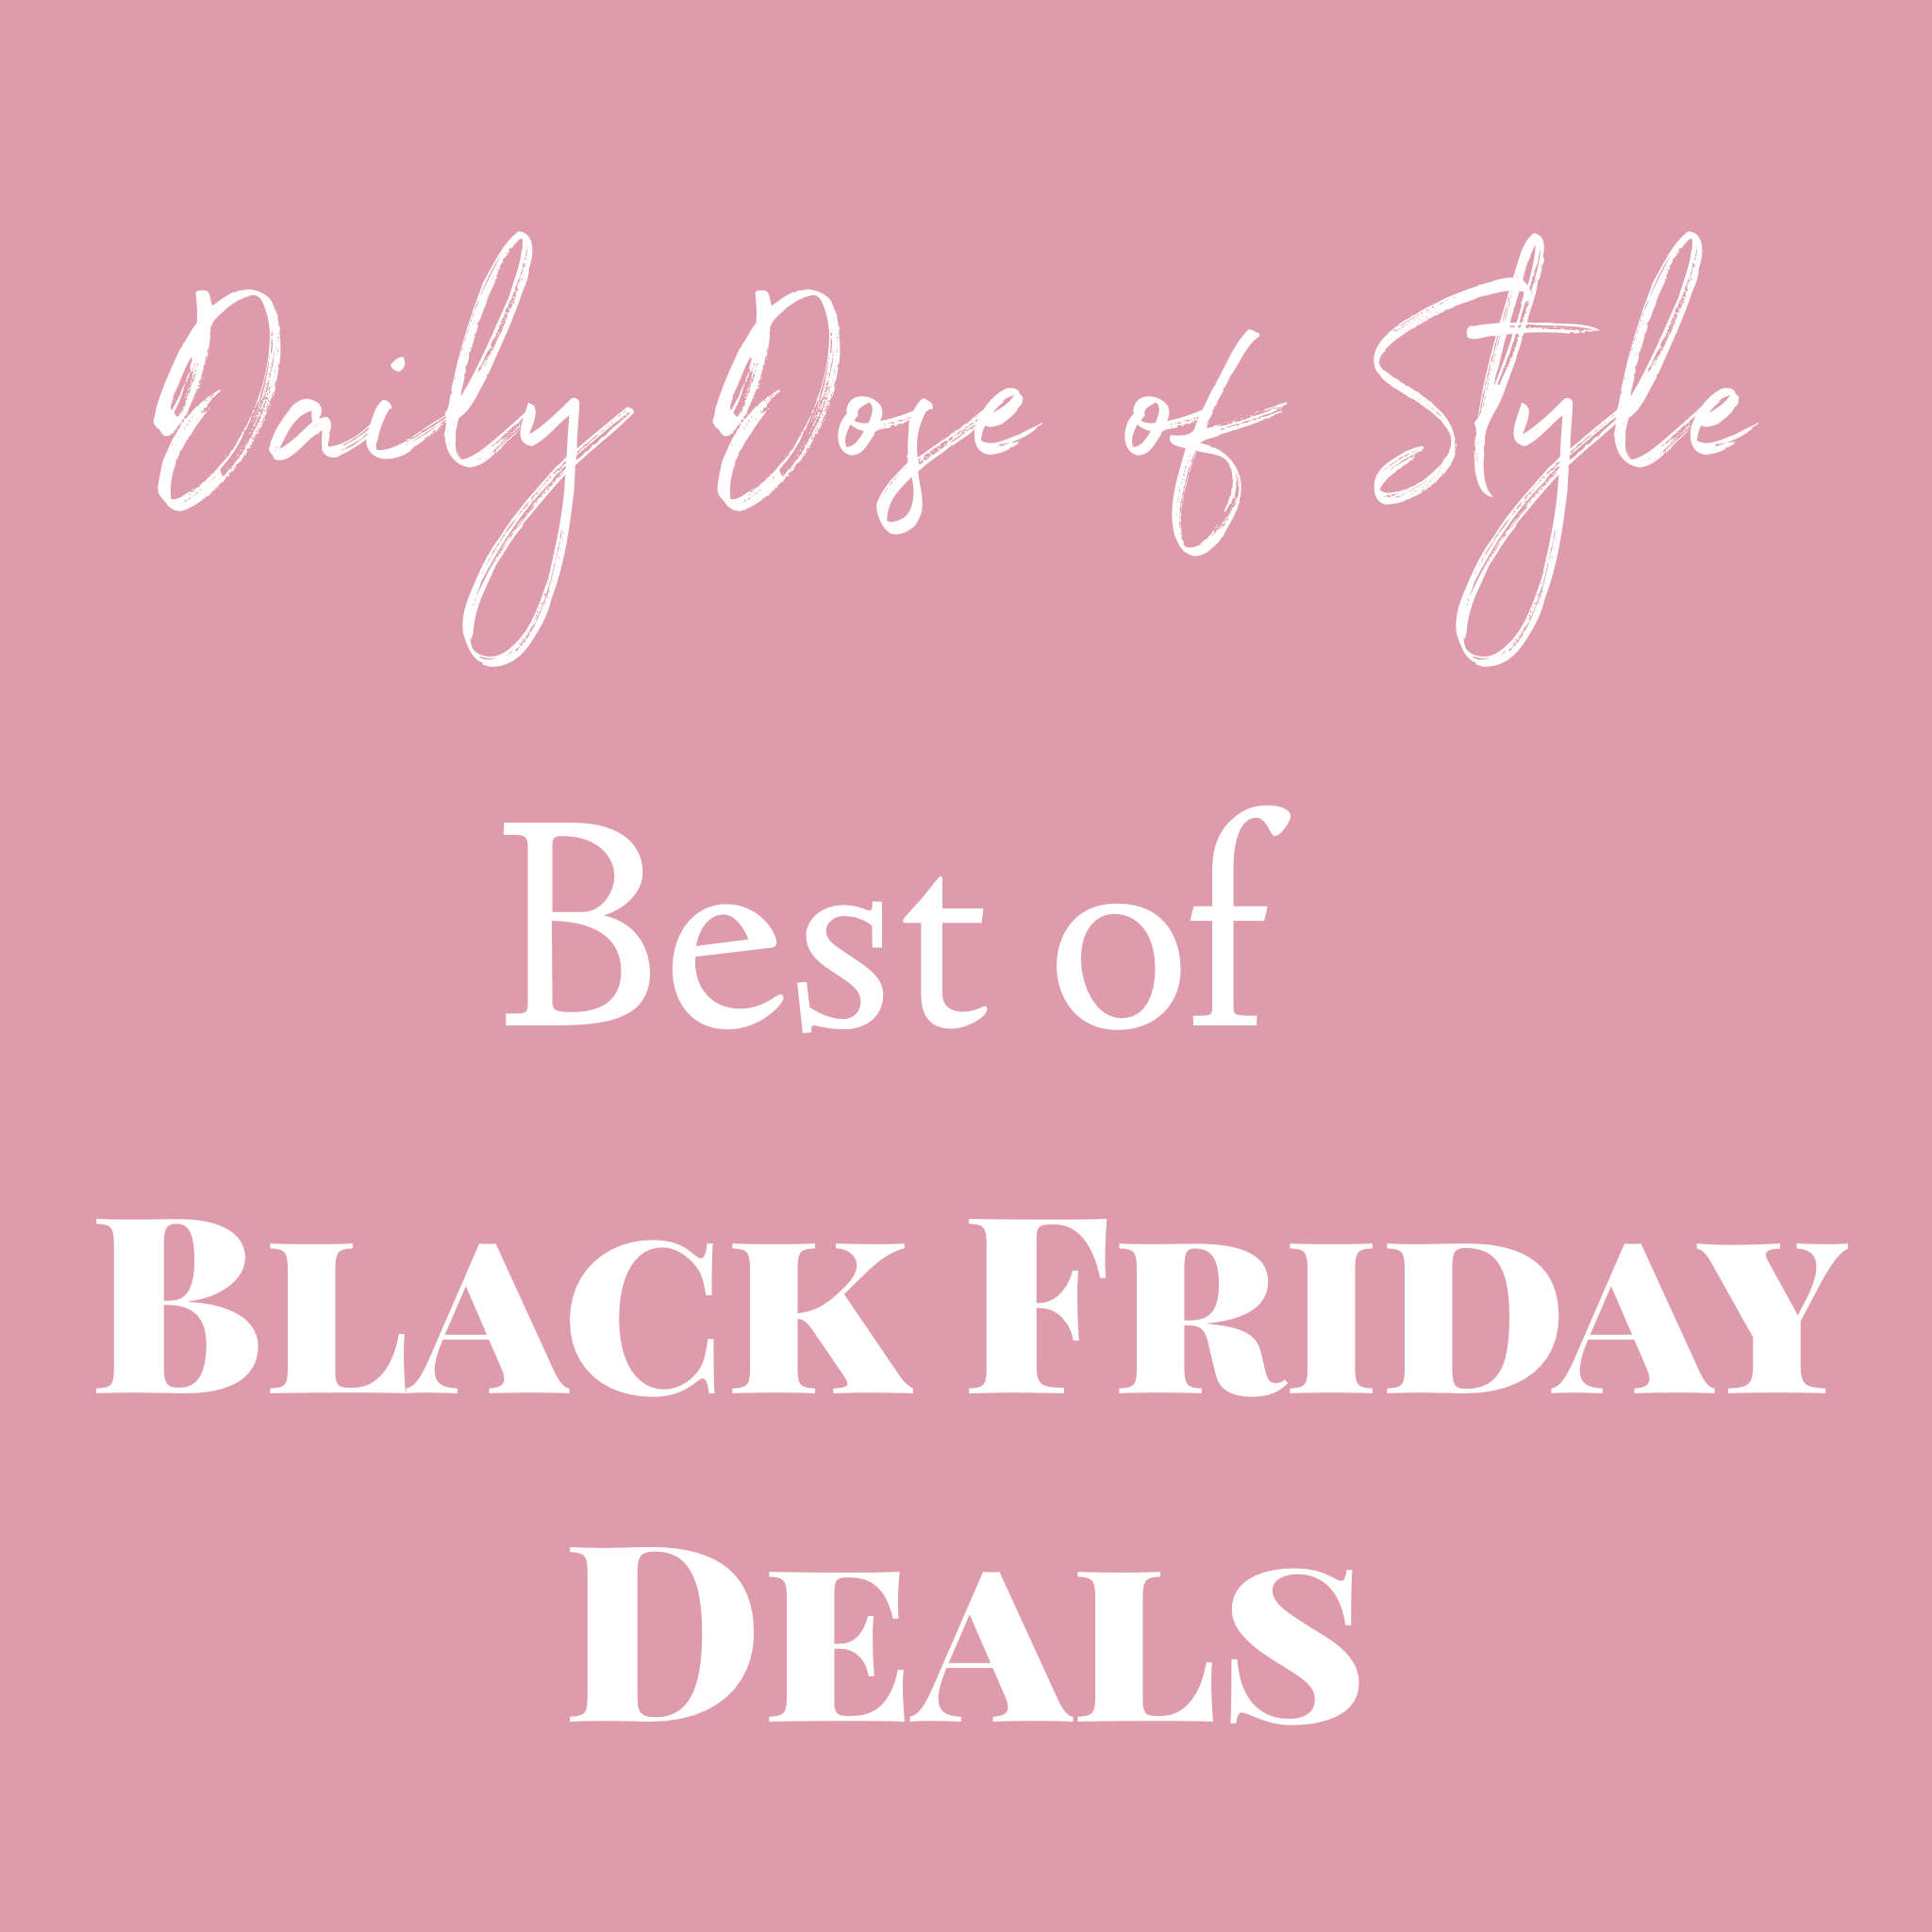 Spanx Black Friday sale is HERE!! Save 20% off sitewide…the